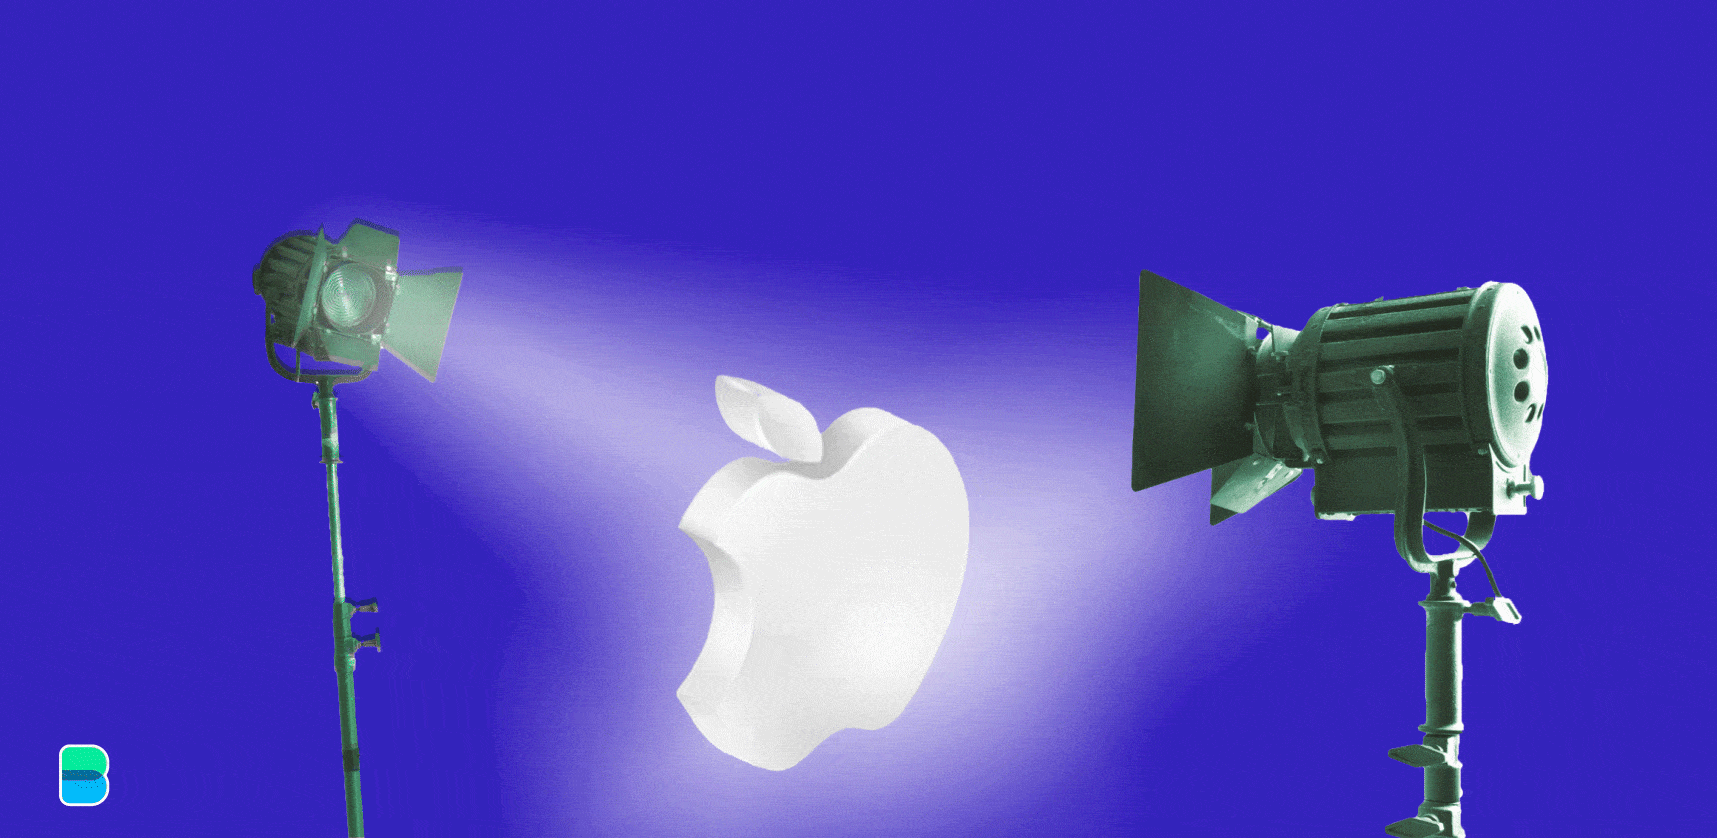 Apple’s latest show and tell